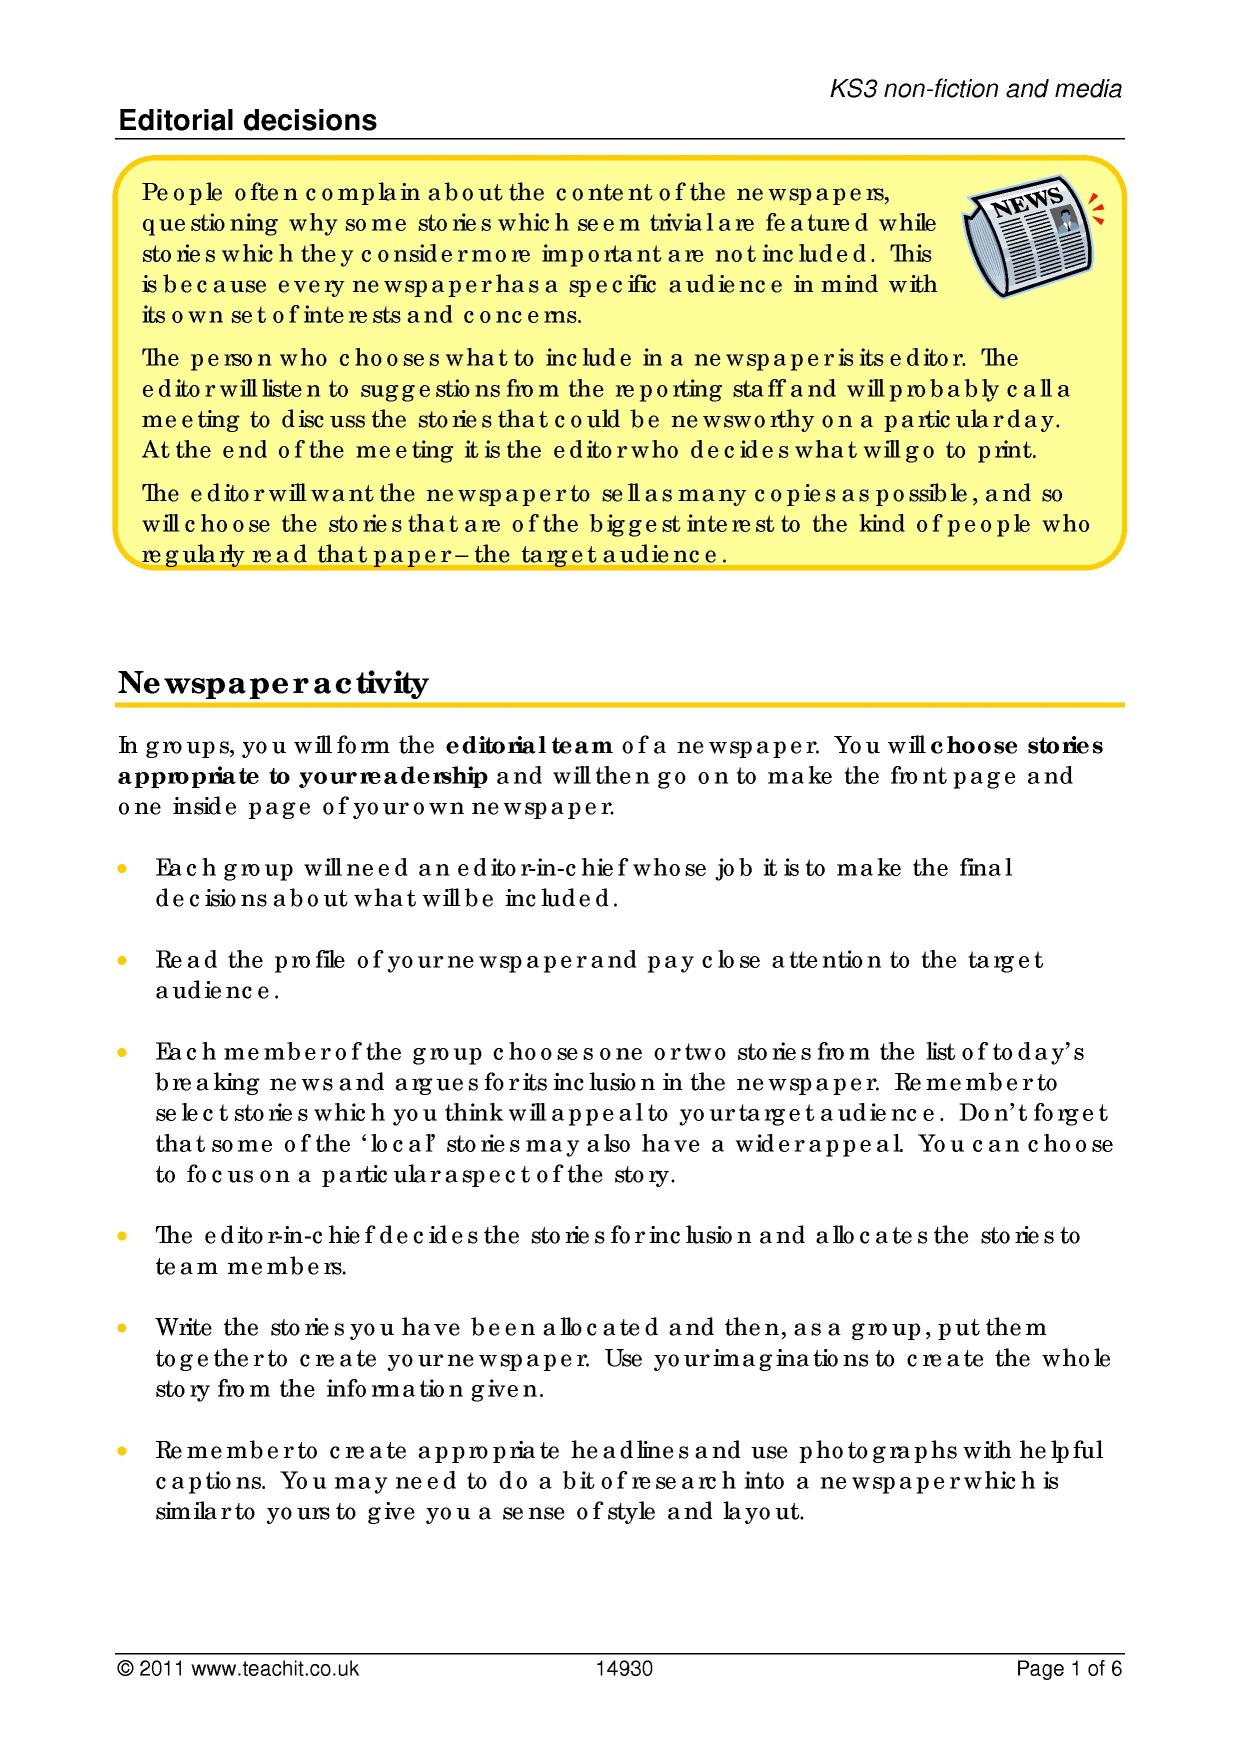 writing a newspaper article ks3 ppt